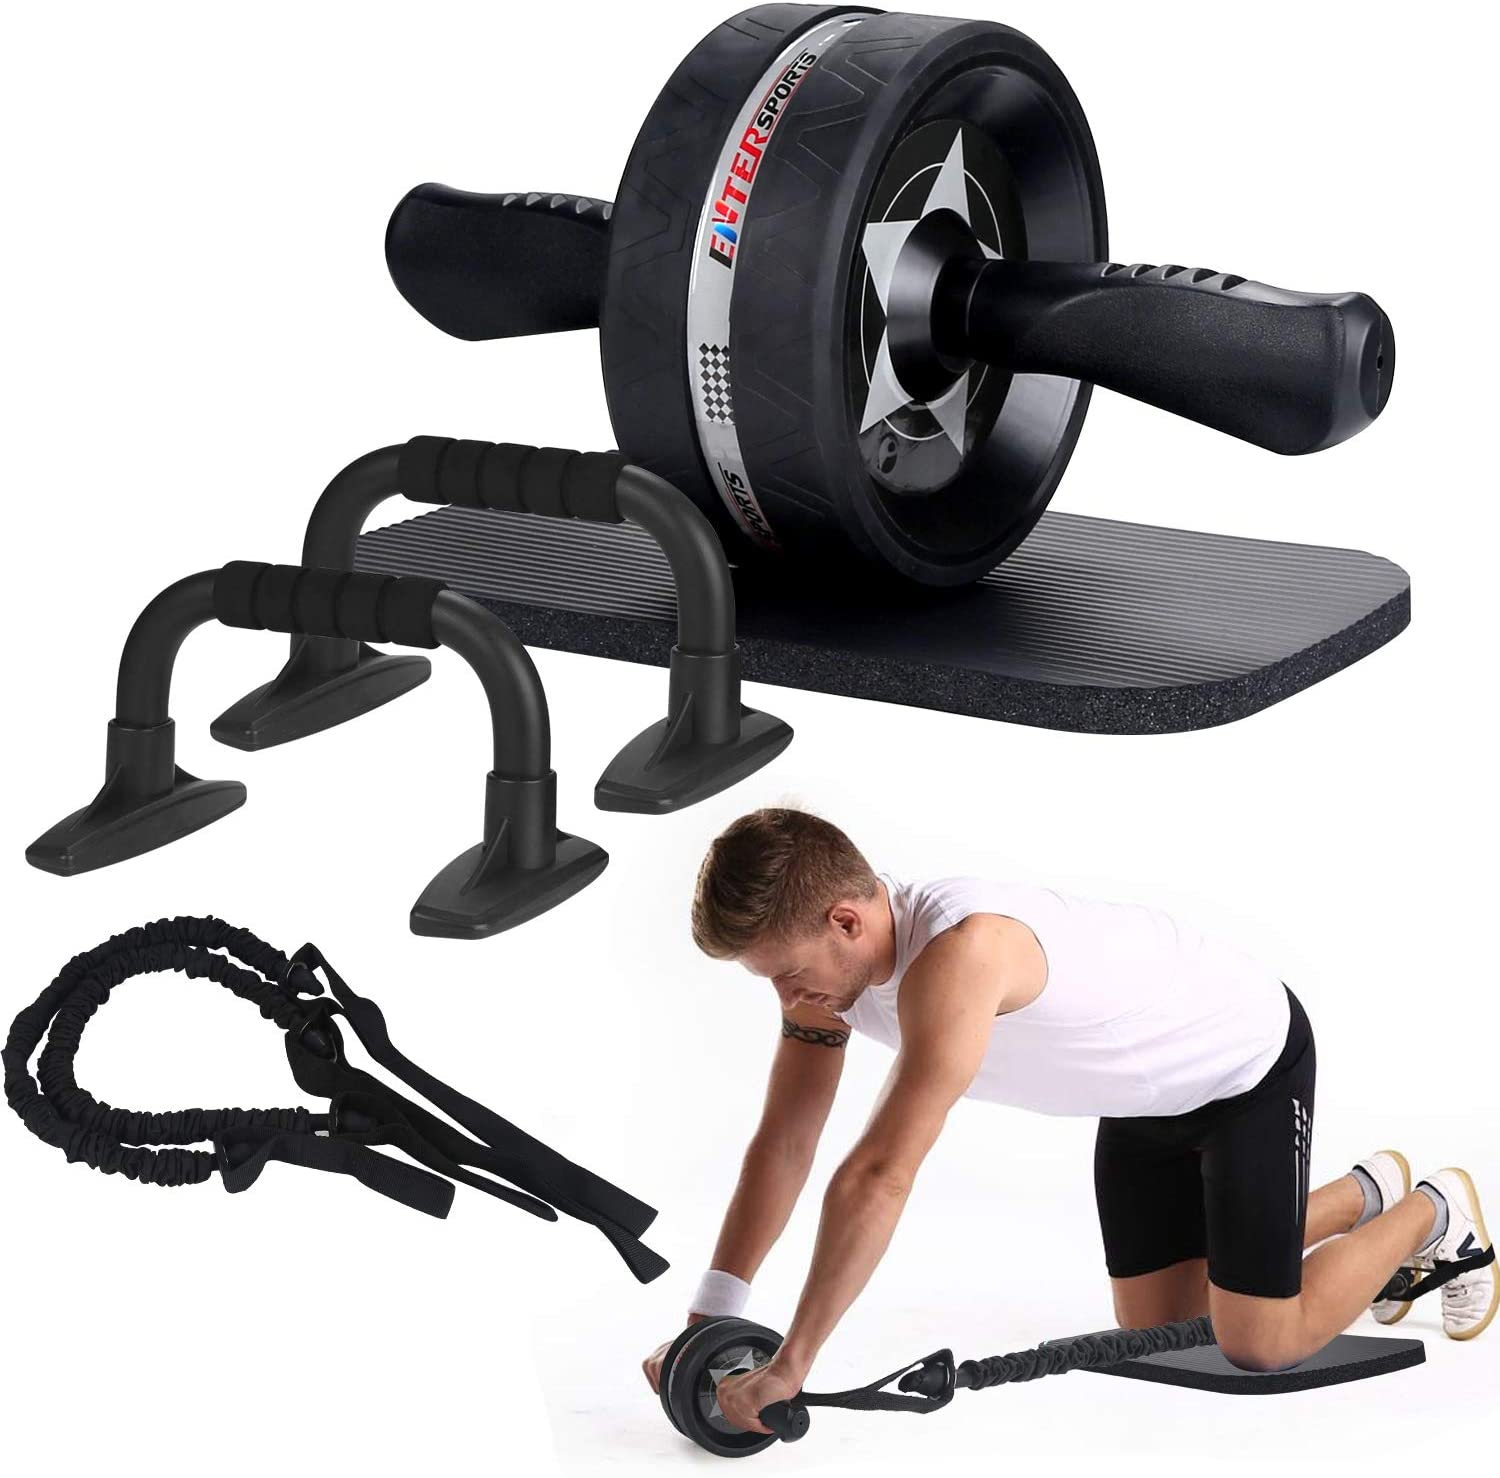 FORIDE Wheel Roller Abdominal Exercise Power Roller Machine Dual Wheel with Foam Knee Pad For Strength Training Body Fitness Workout Home-Gym